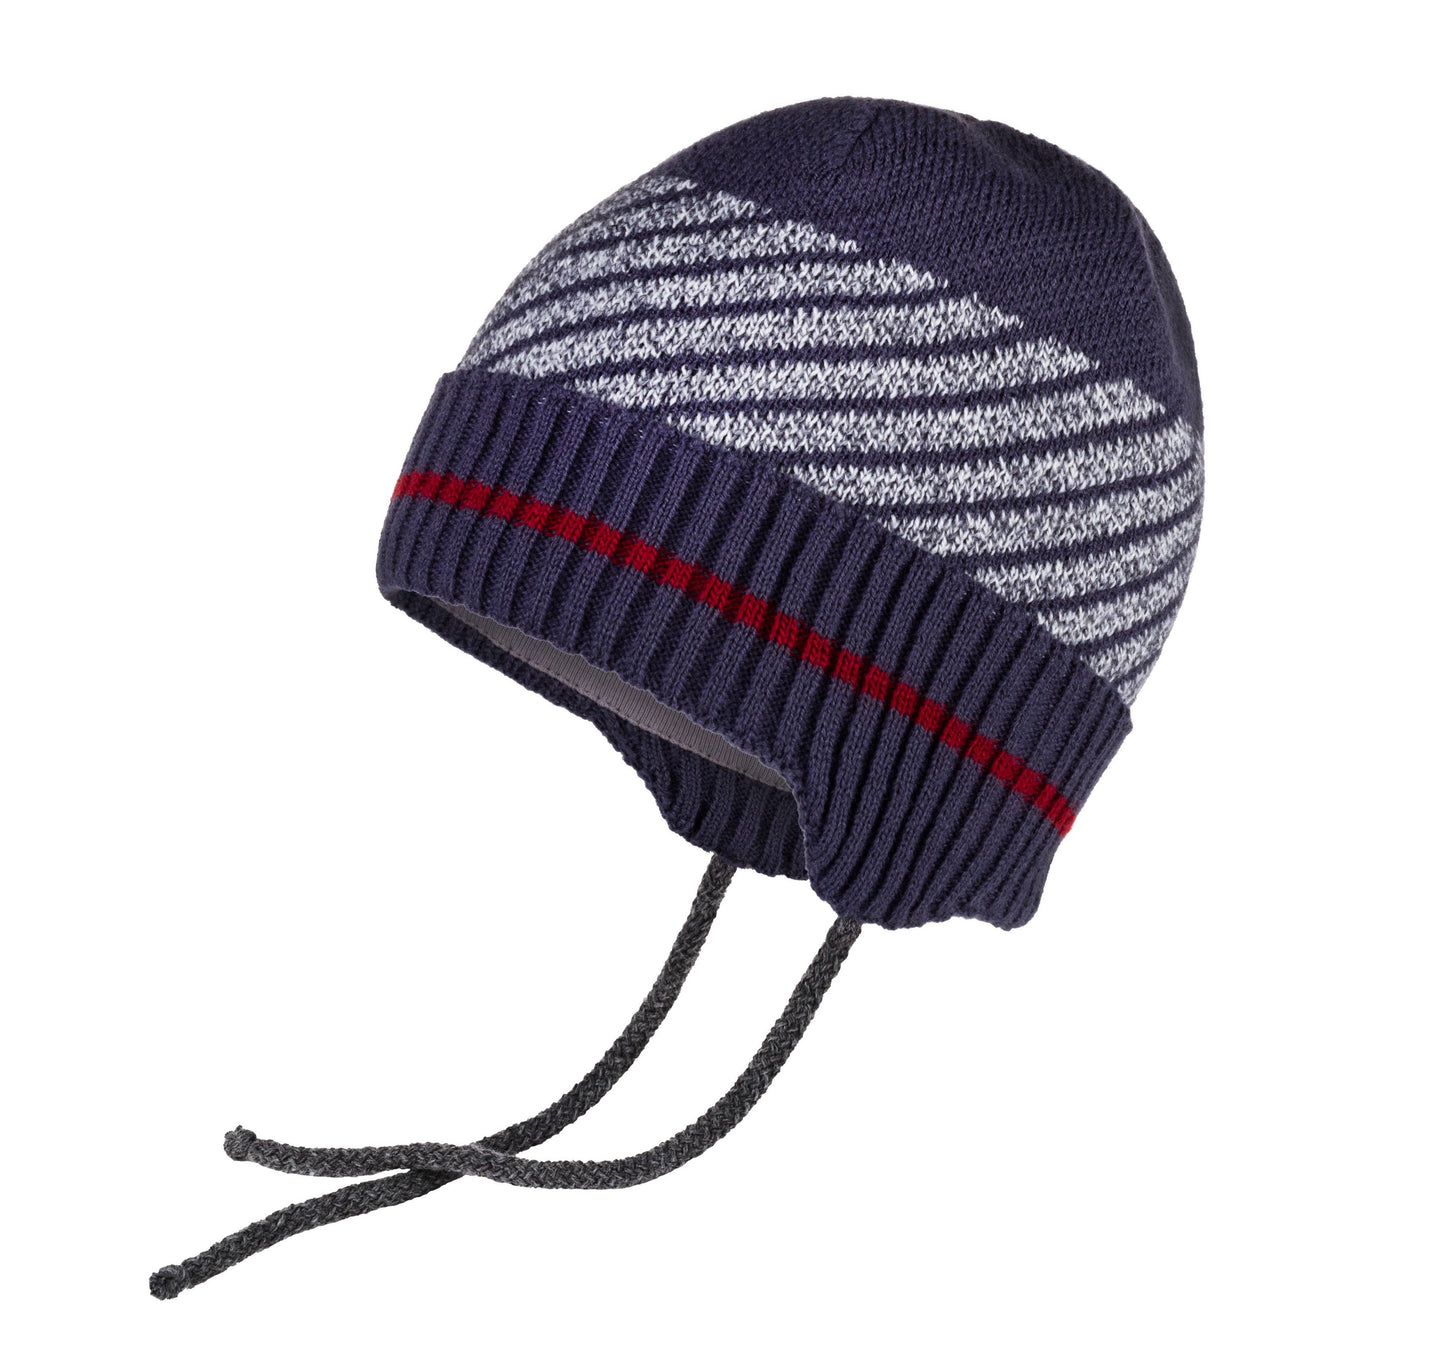 Conte/Esli Double knitted kids hat with strings - For Boys (18С-39СП)